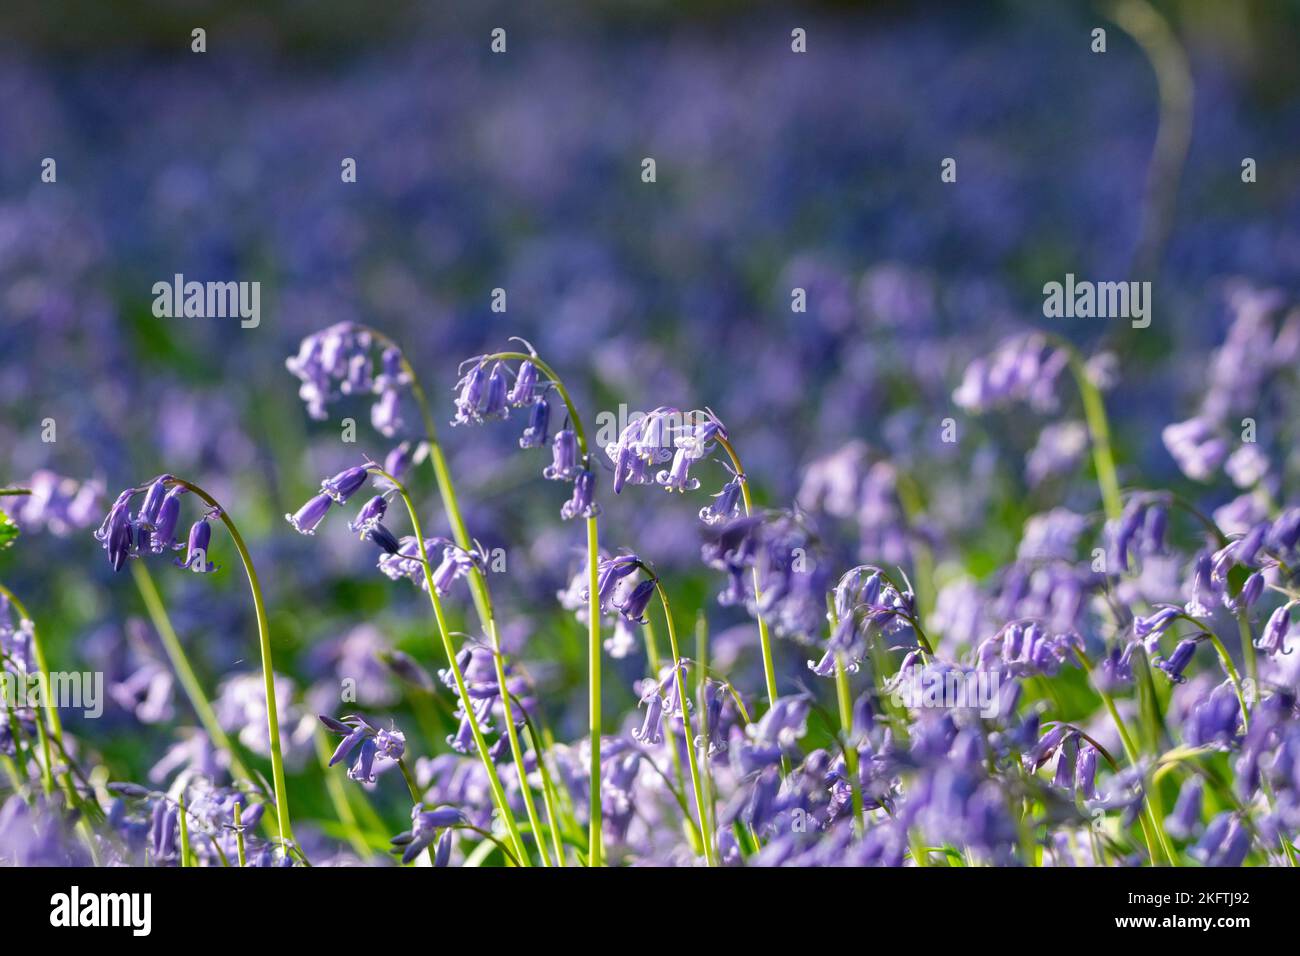 Bluebells carpeting the woods Stock Photo